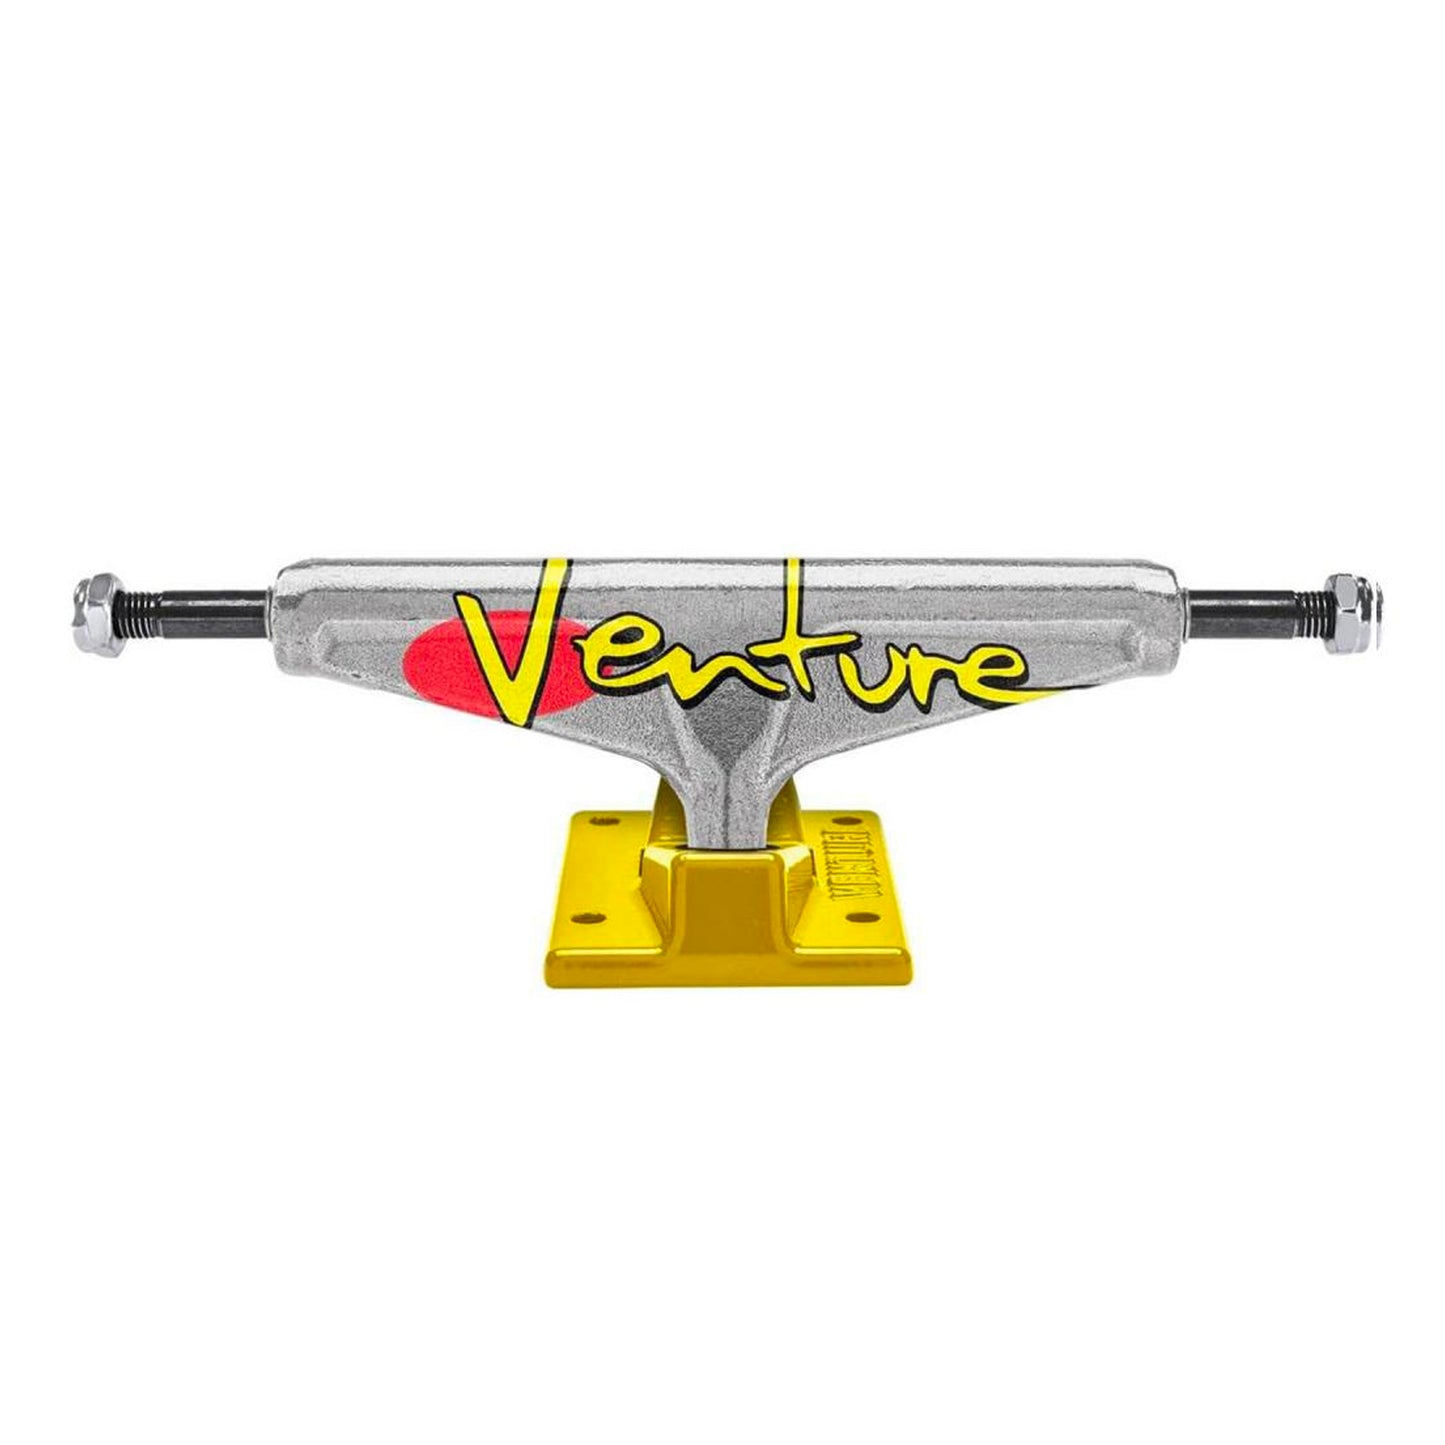 Venture - 5.0 (7.75") 92 Full Bleed Team Truck - Polished/ Yellow (Sold as a pair) - Prime Delux Store